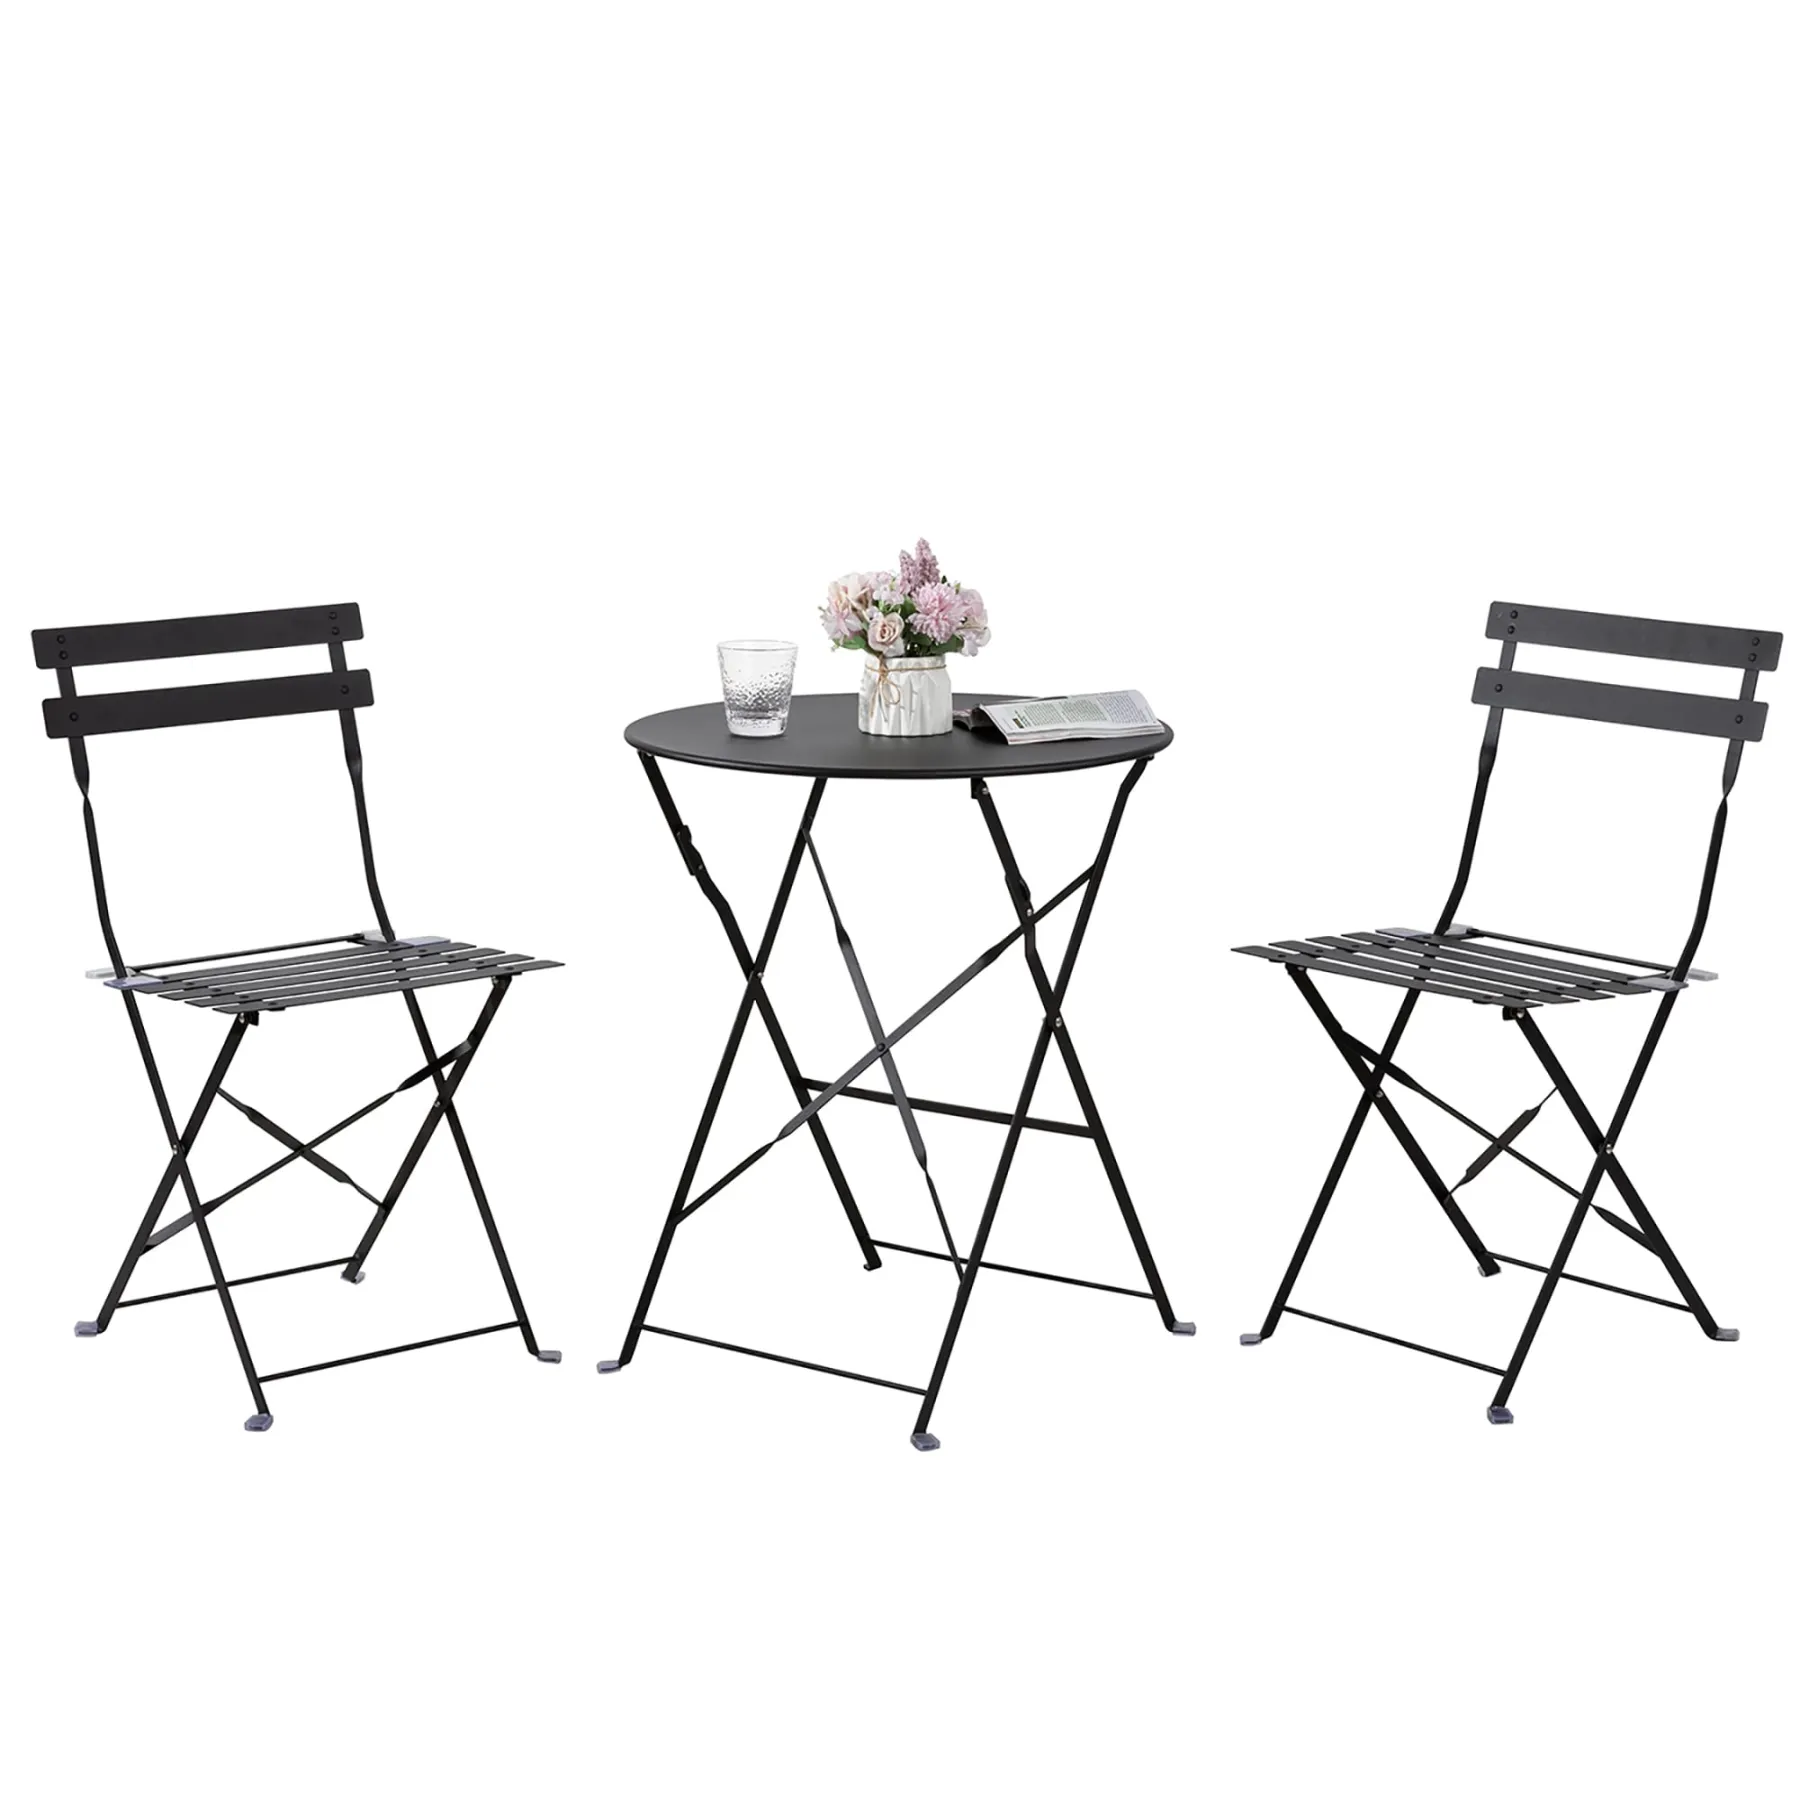 3-Piece Powder-Coated Iron Bistro Set of Foldable Garden Table and Chairs in Black